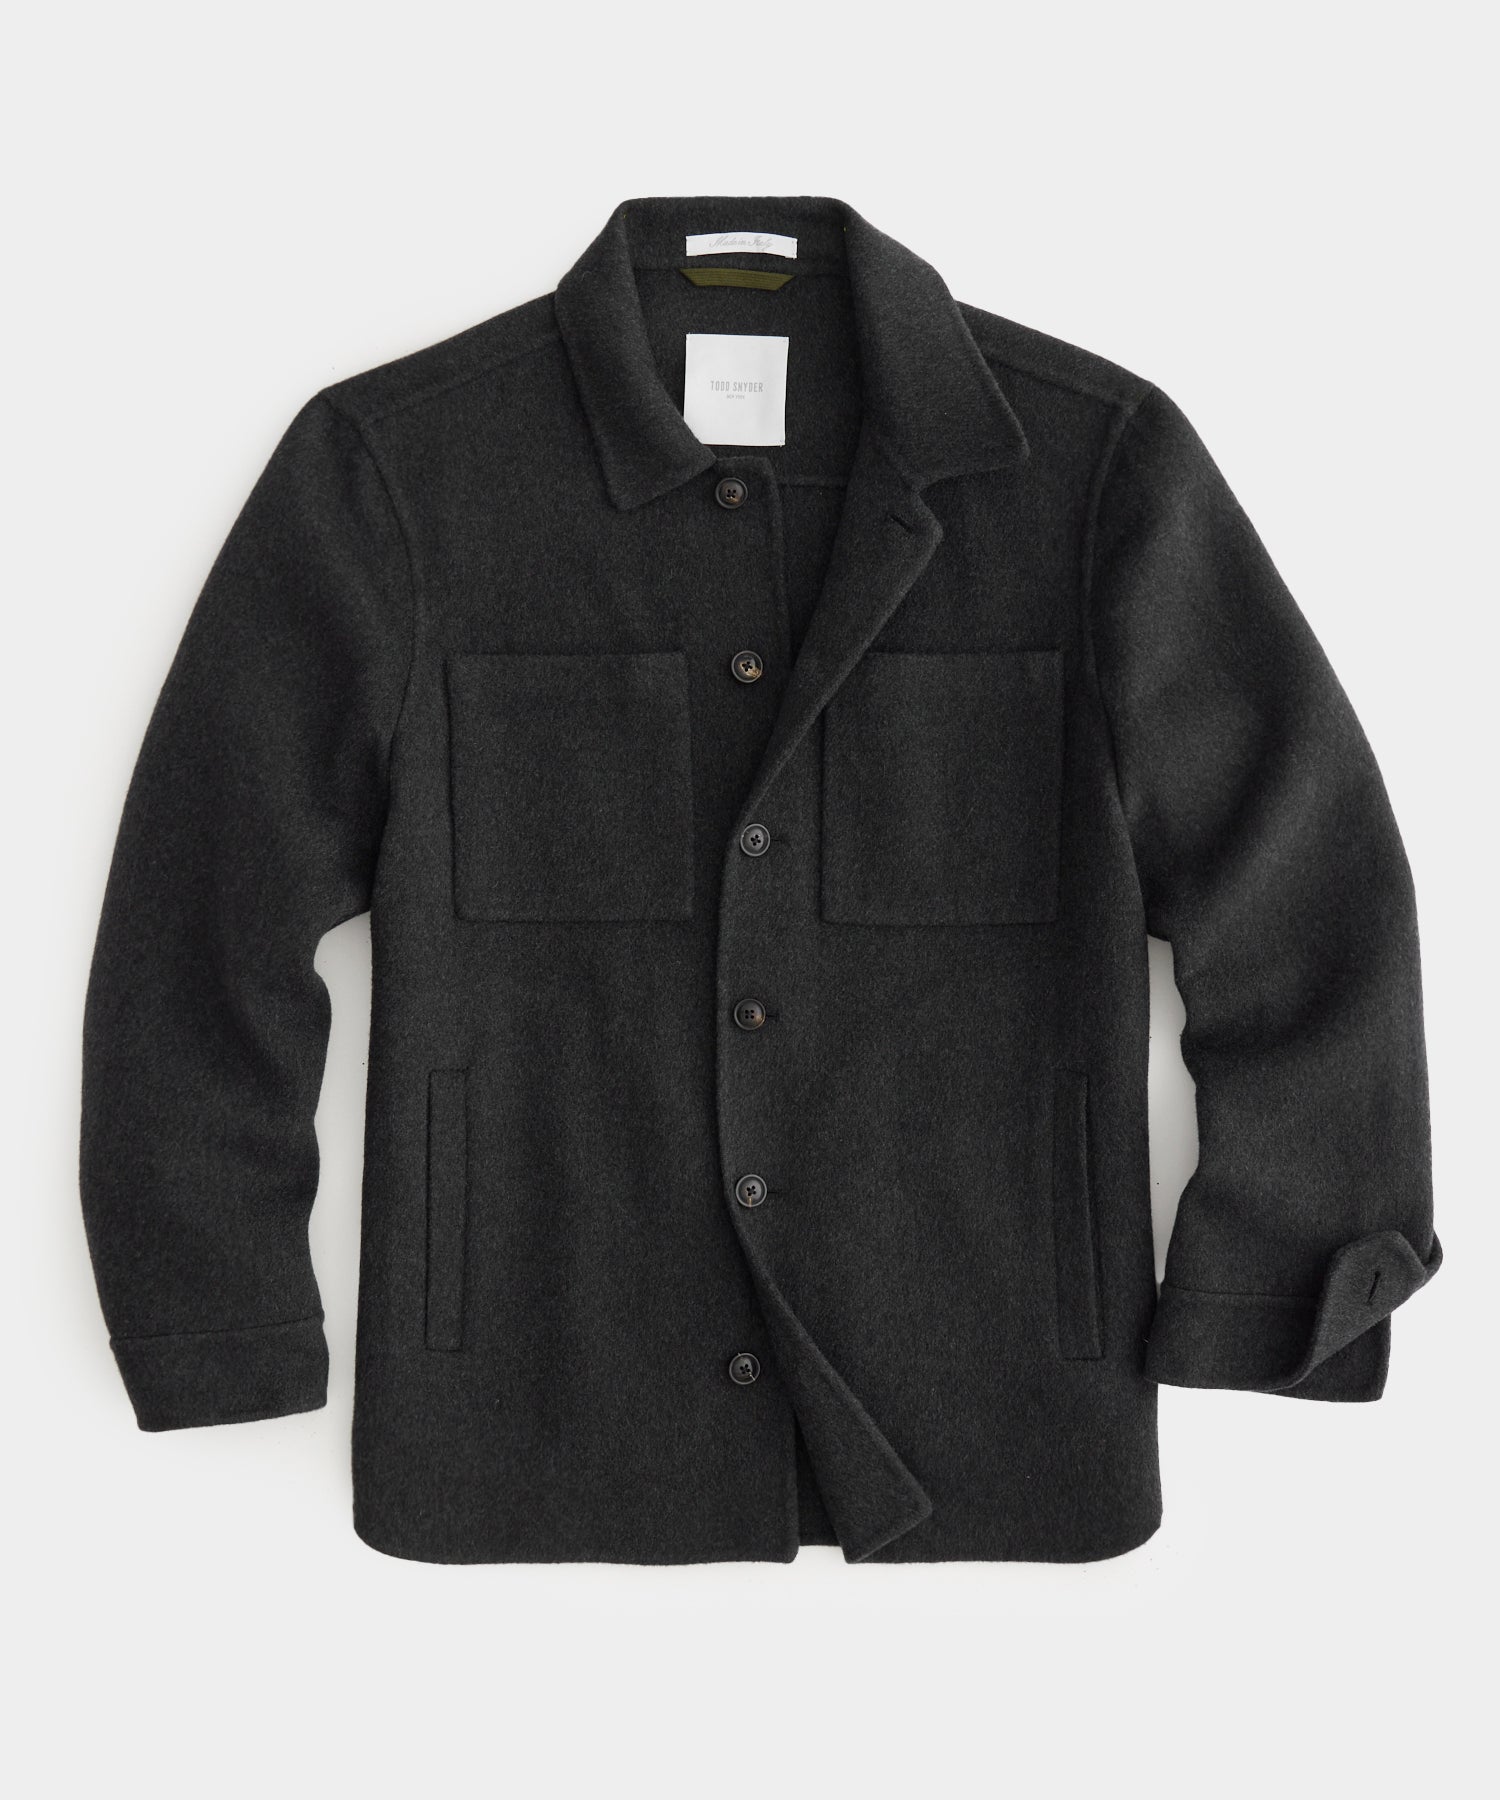 Italian Cashmere Shirt Jacket in Charcoal